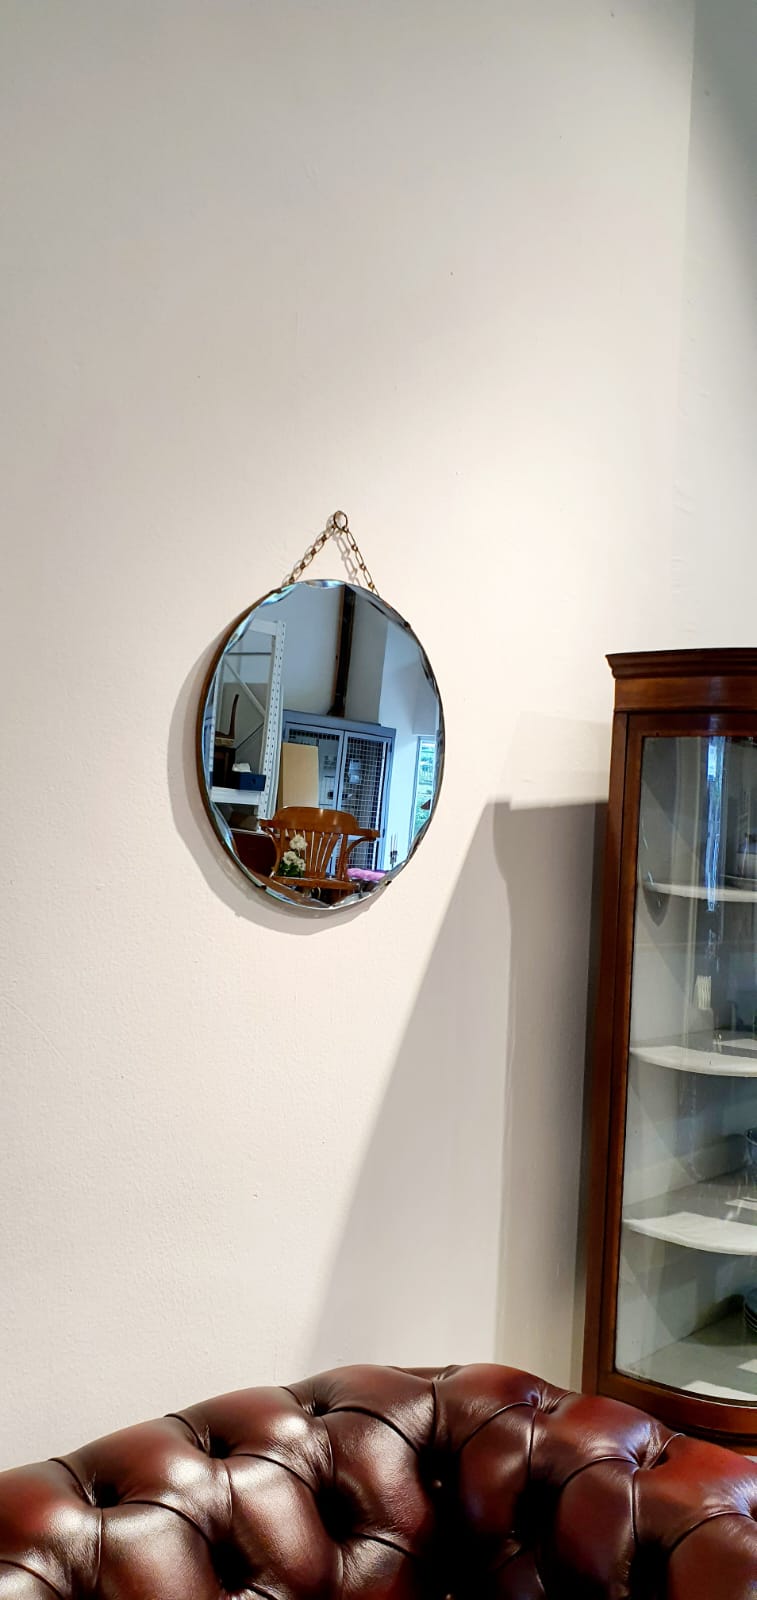 A round vintage mirror with a beveled edge